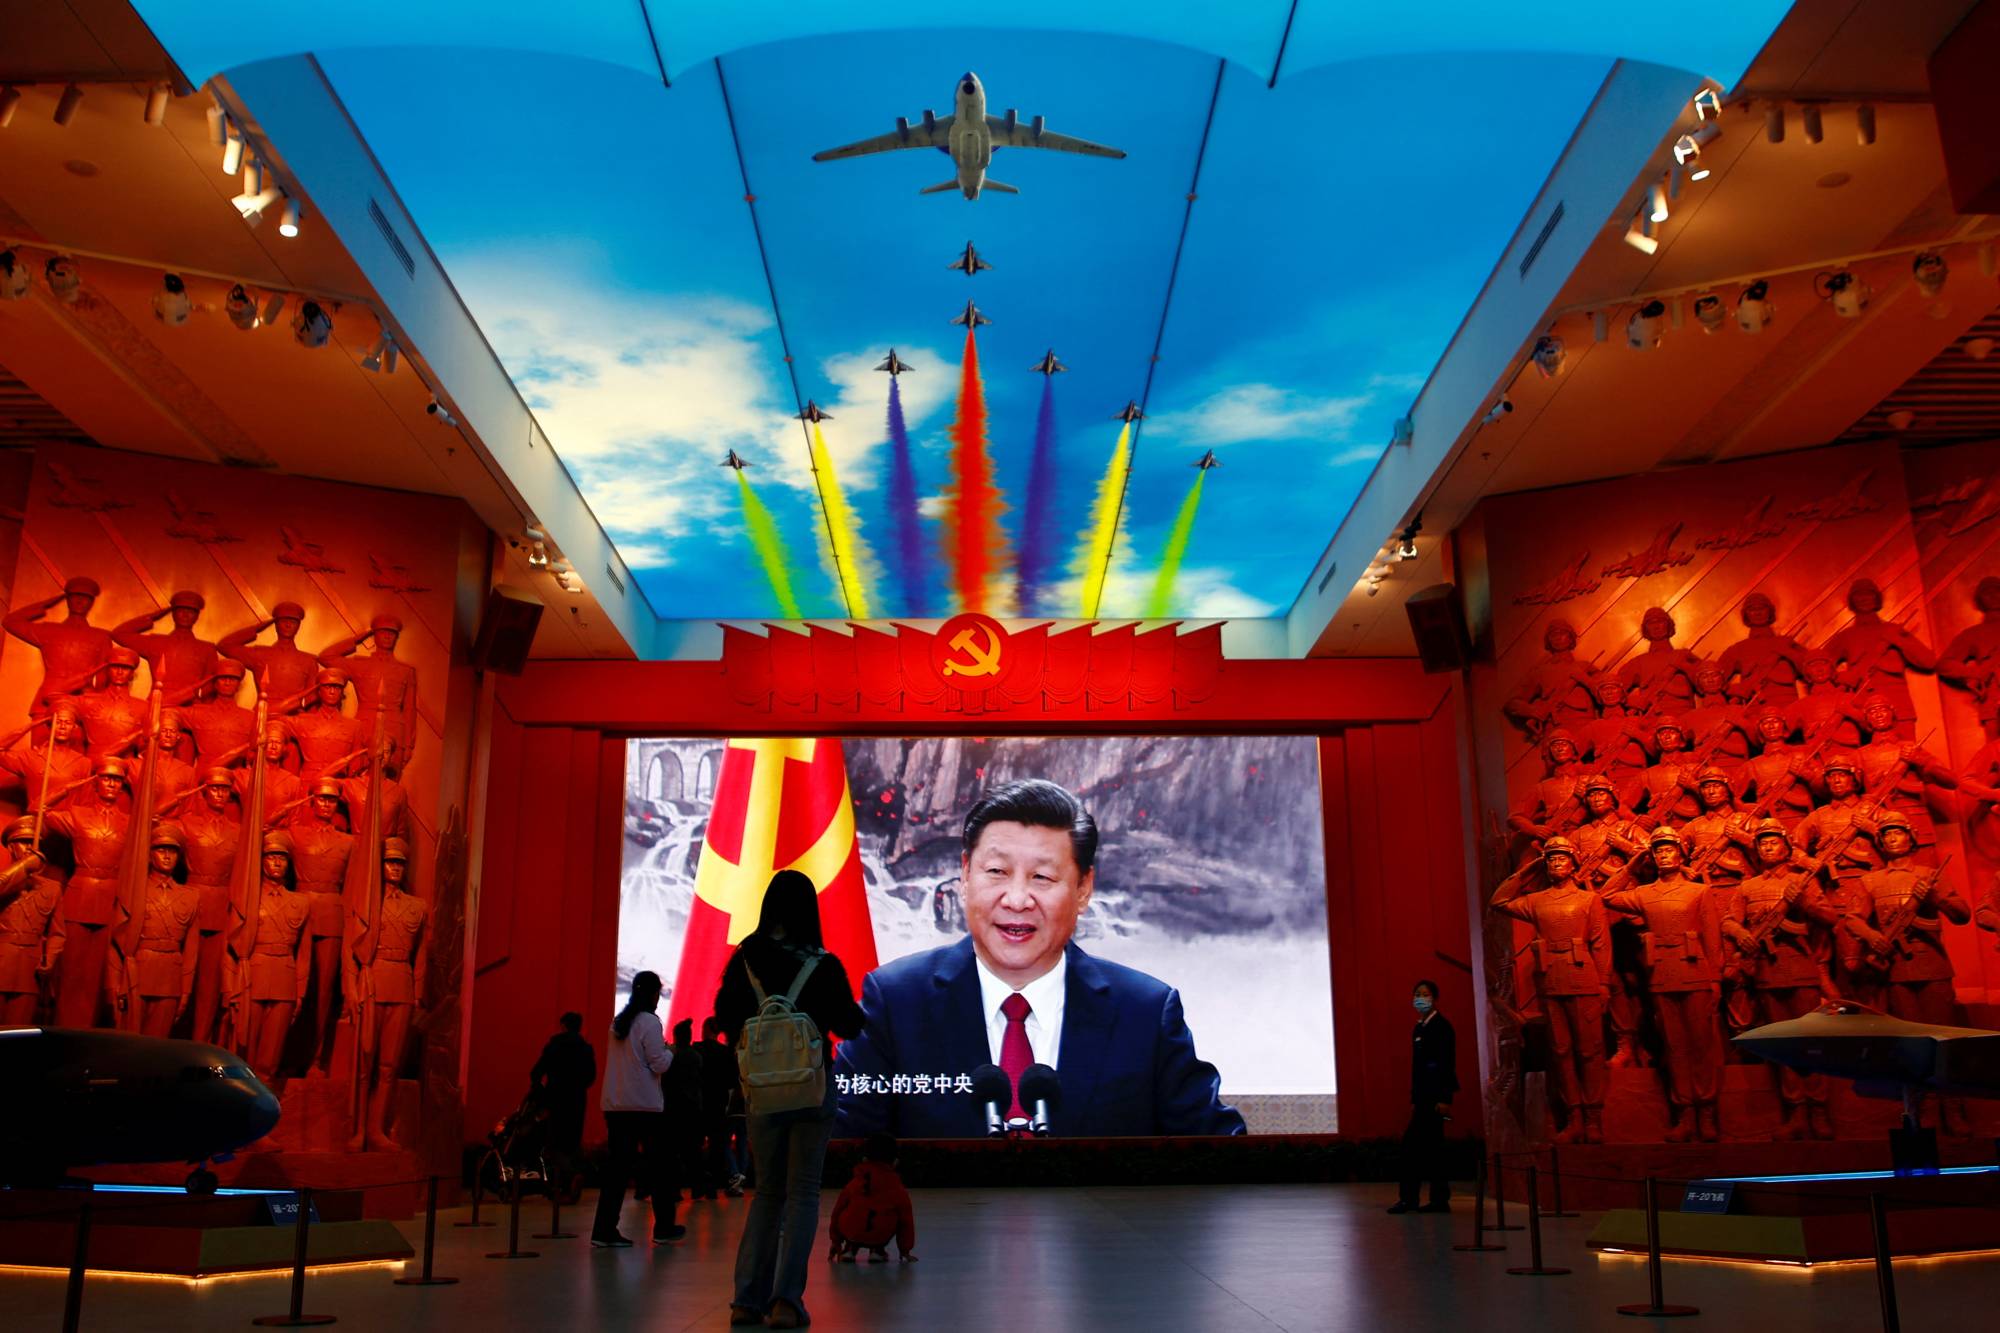 Visitors stand in front of a giant screen displaying Chinese leader Xi Jinping next to a flag of the Communist Party of China, at the Military Museum of the Chinese People's Revolution in Beijing last October. | REUTERS